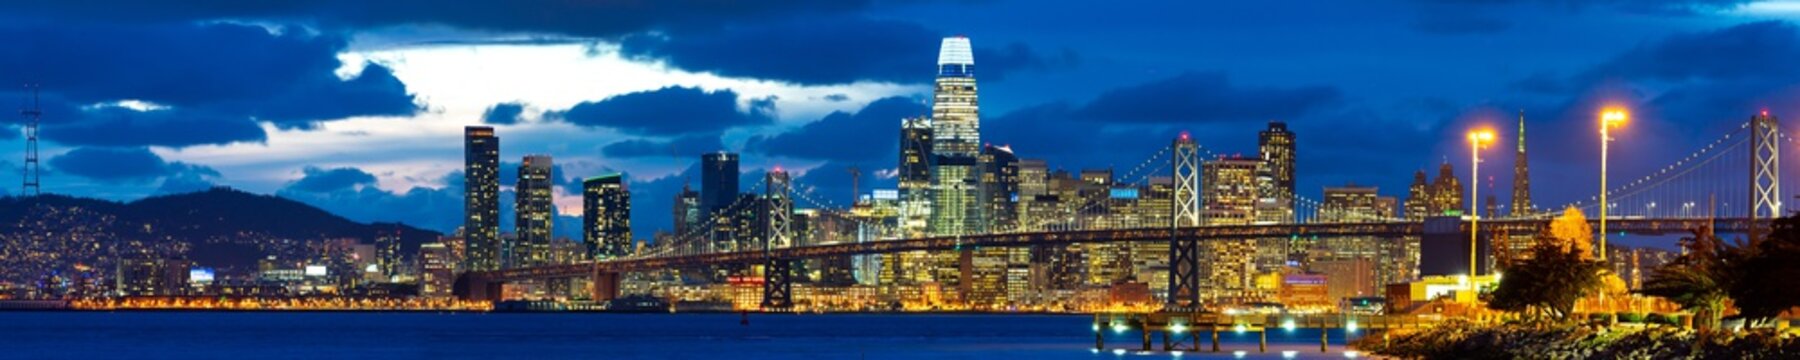 High Resolution Panoramic View of San Francisco City Skyline with Bay Bridge from Oakland 